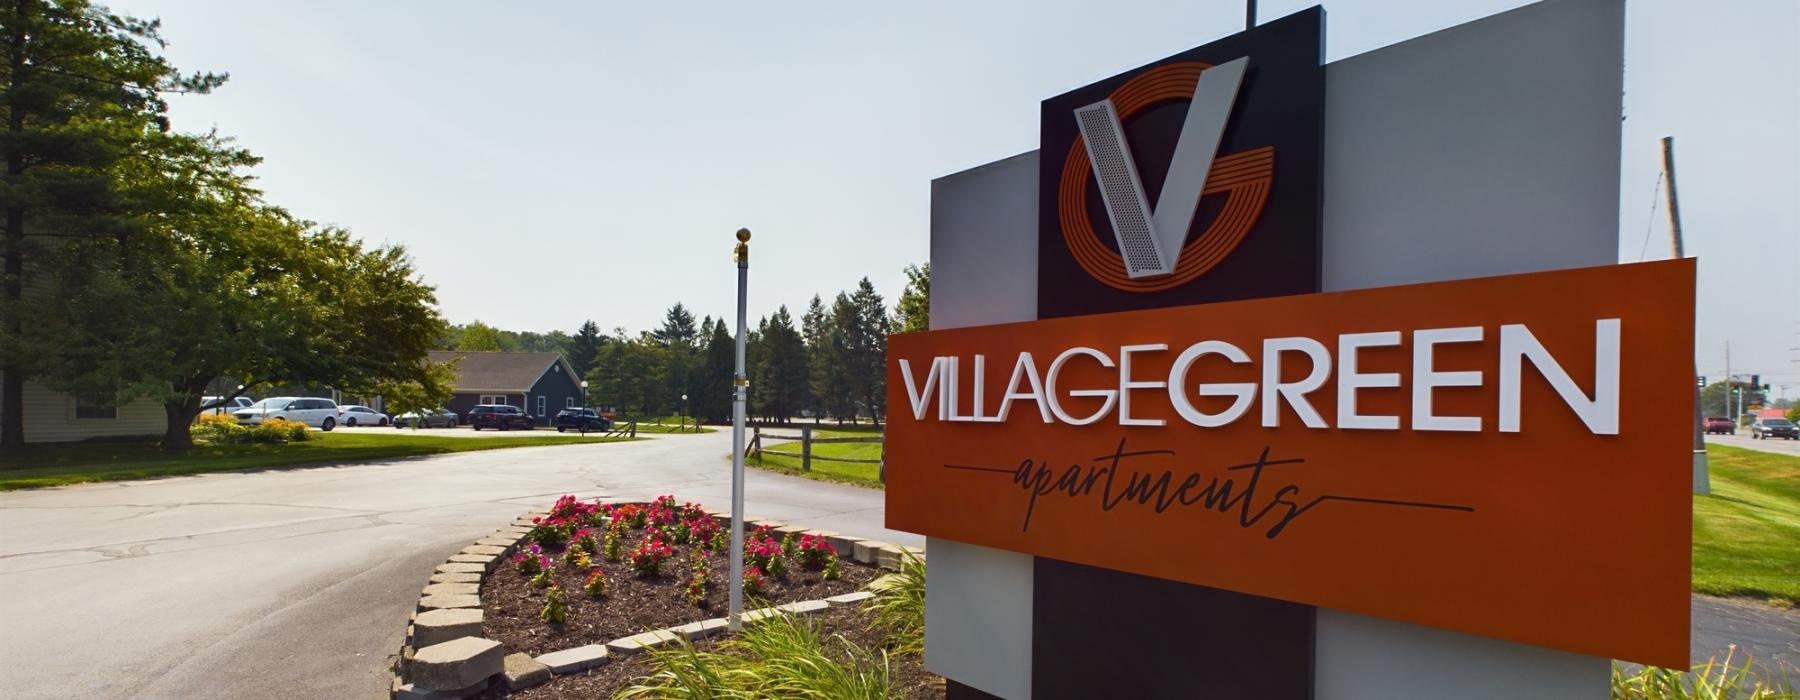 a sign at the entrance of Village Green Apartments